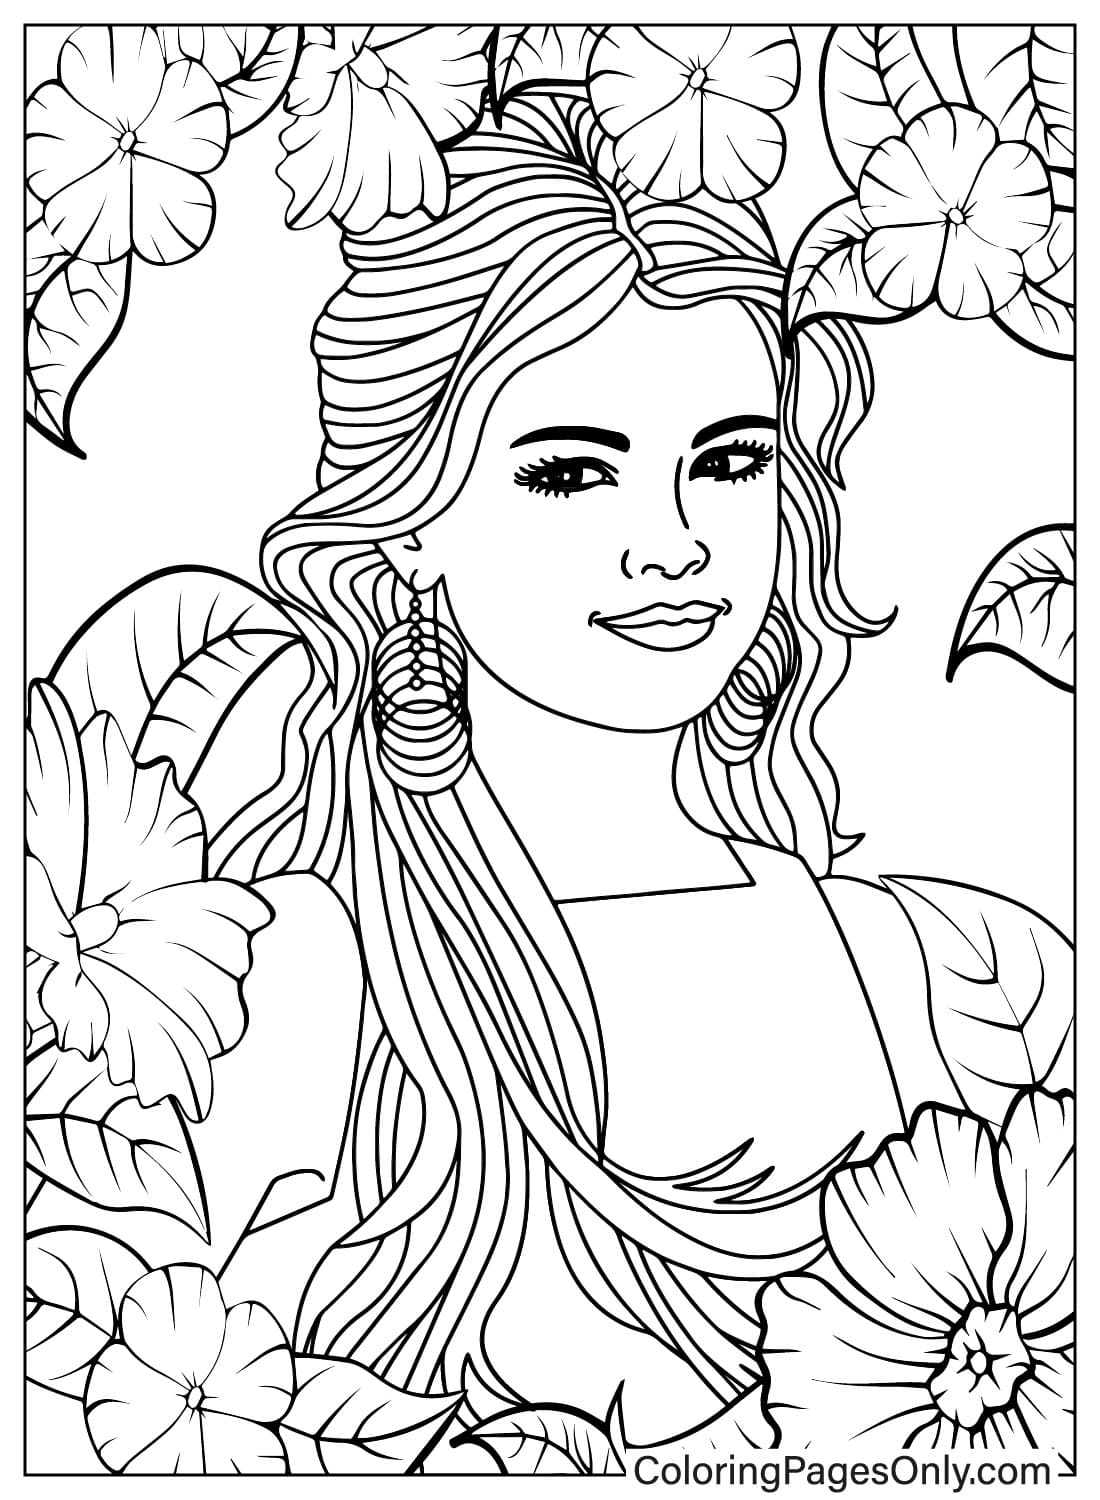 Drawing Selena Gomez Coloring Page from Selena Gomez